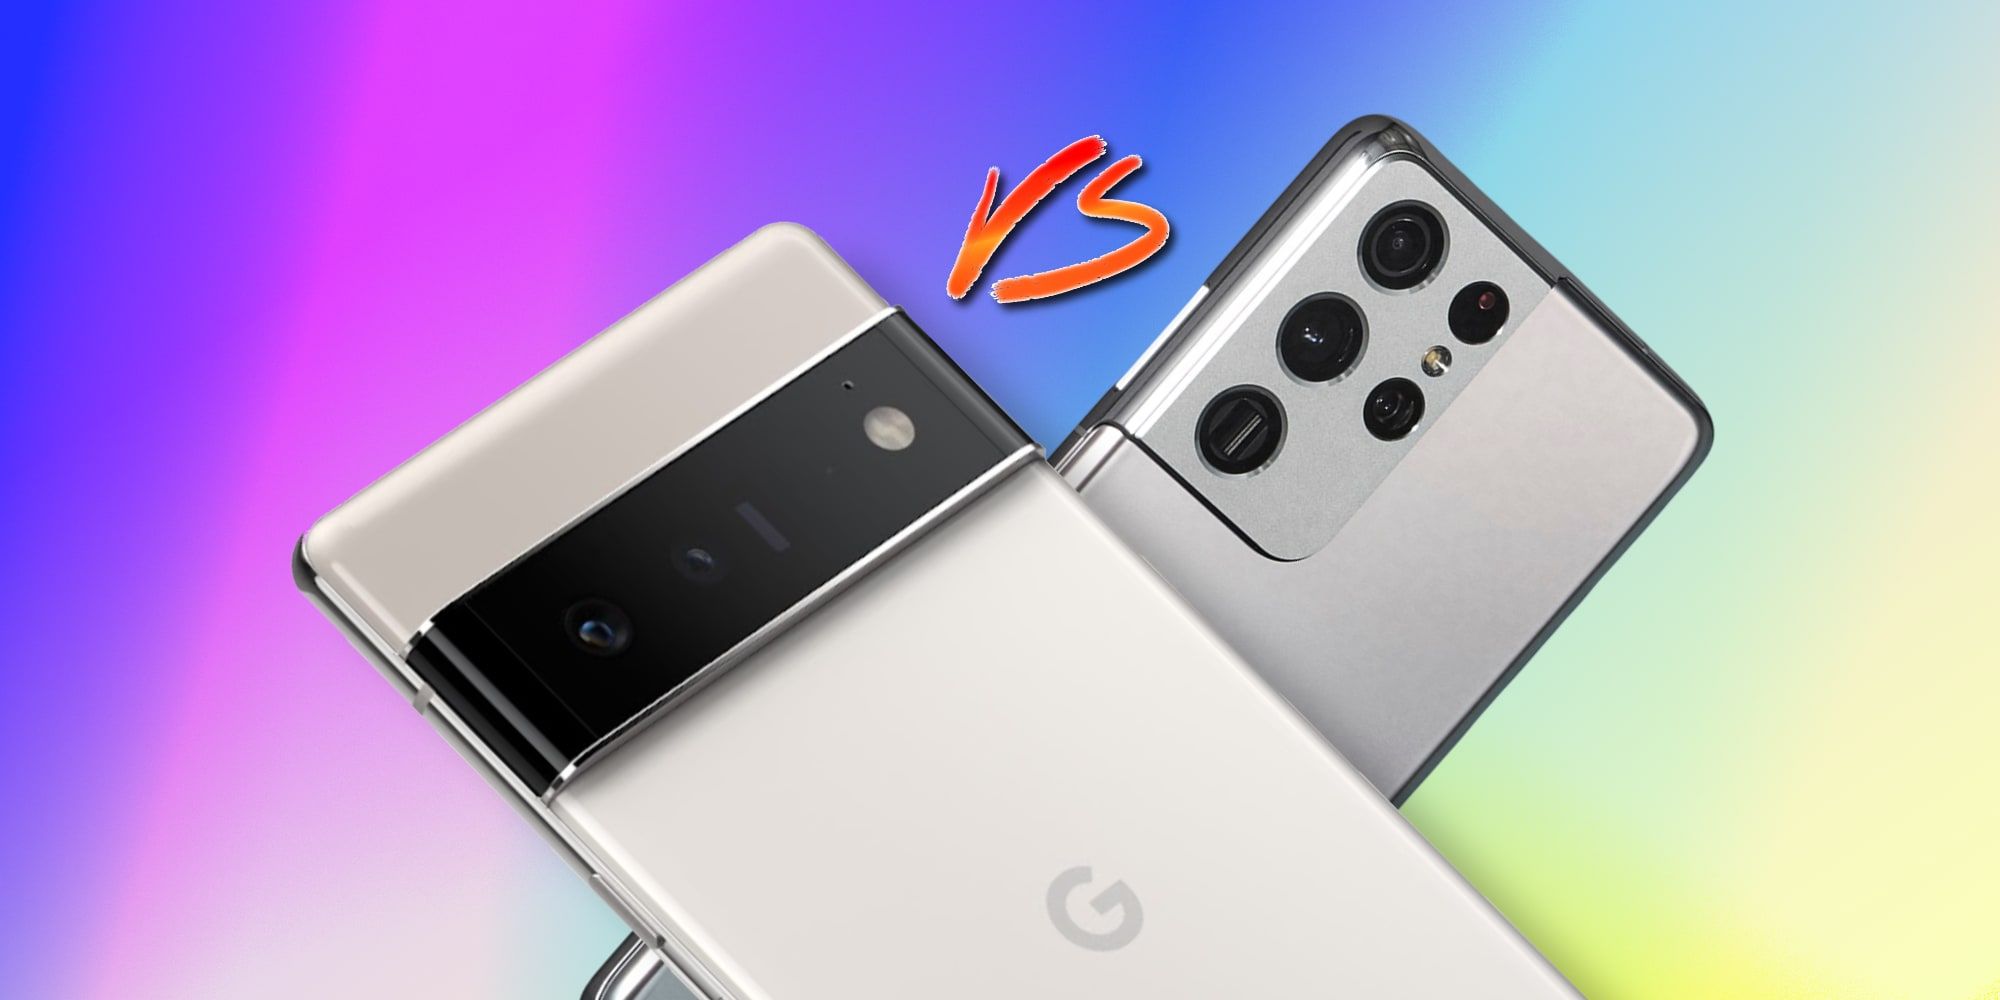 Google Pixel 6 Pro Vs Samsung Galaxy S21 Ultra Best For Photography